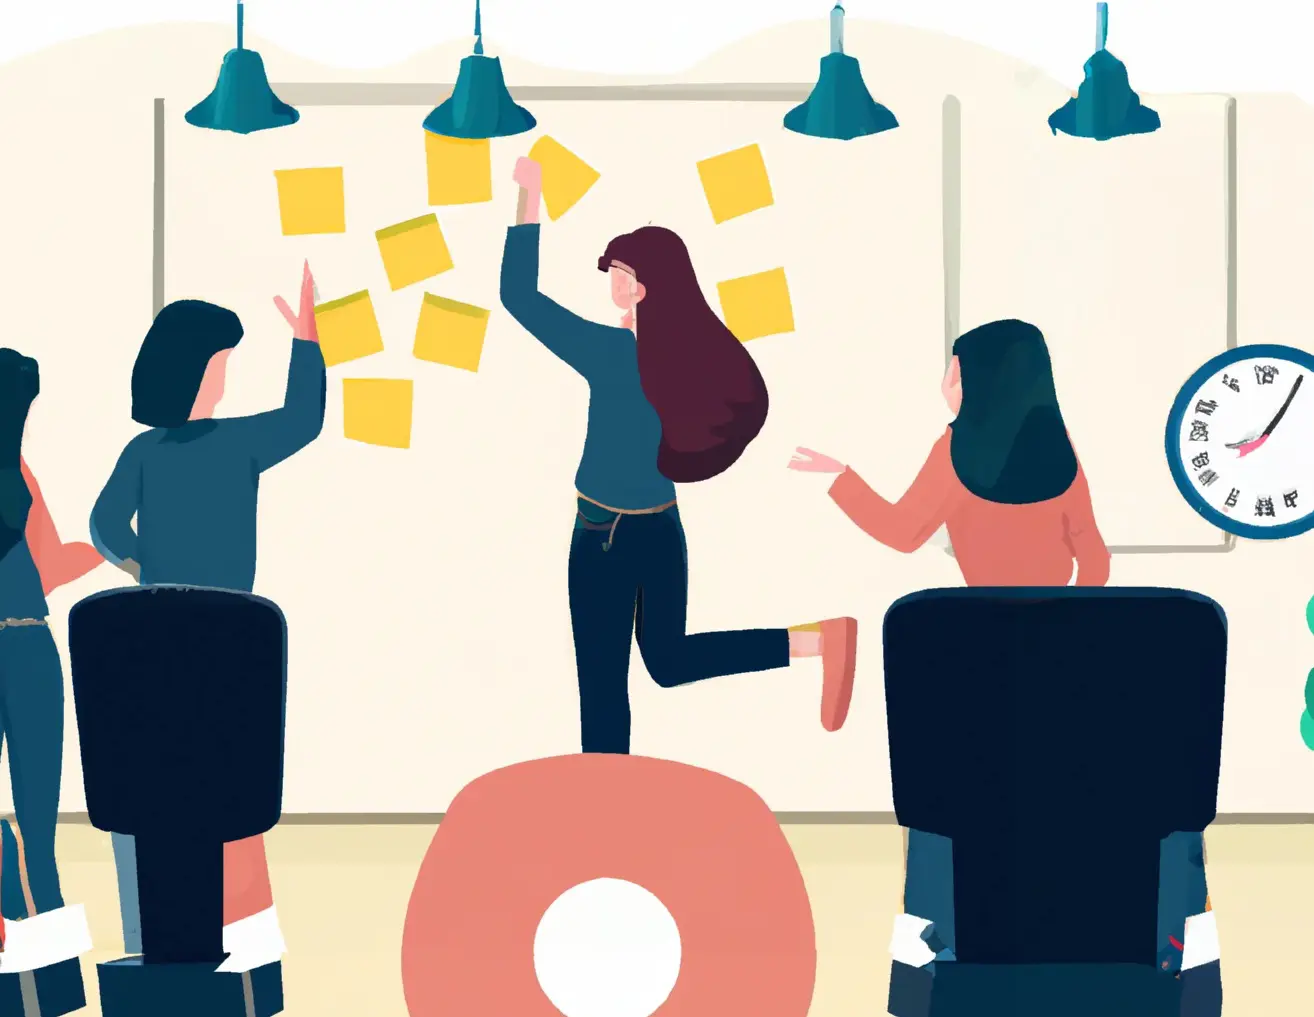 The Design Sprint is a method for quickly solving business challenges. The illustration shows people standing at a blackboard and sticking sticky notes on the wall. You also see a clock, because limiting working hours is an important factor in design sprints.